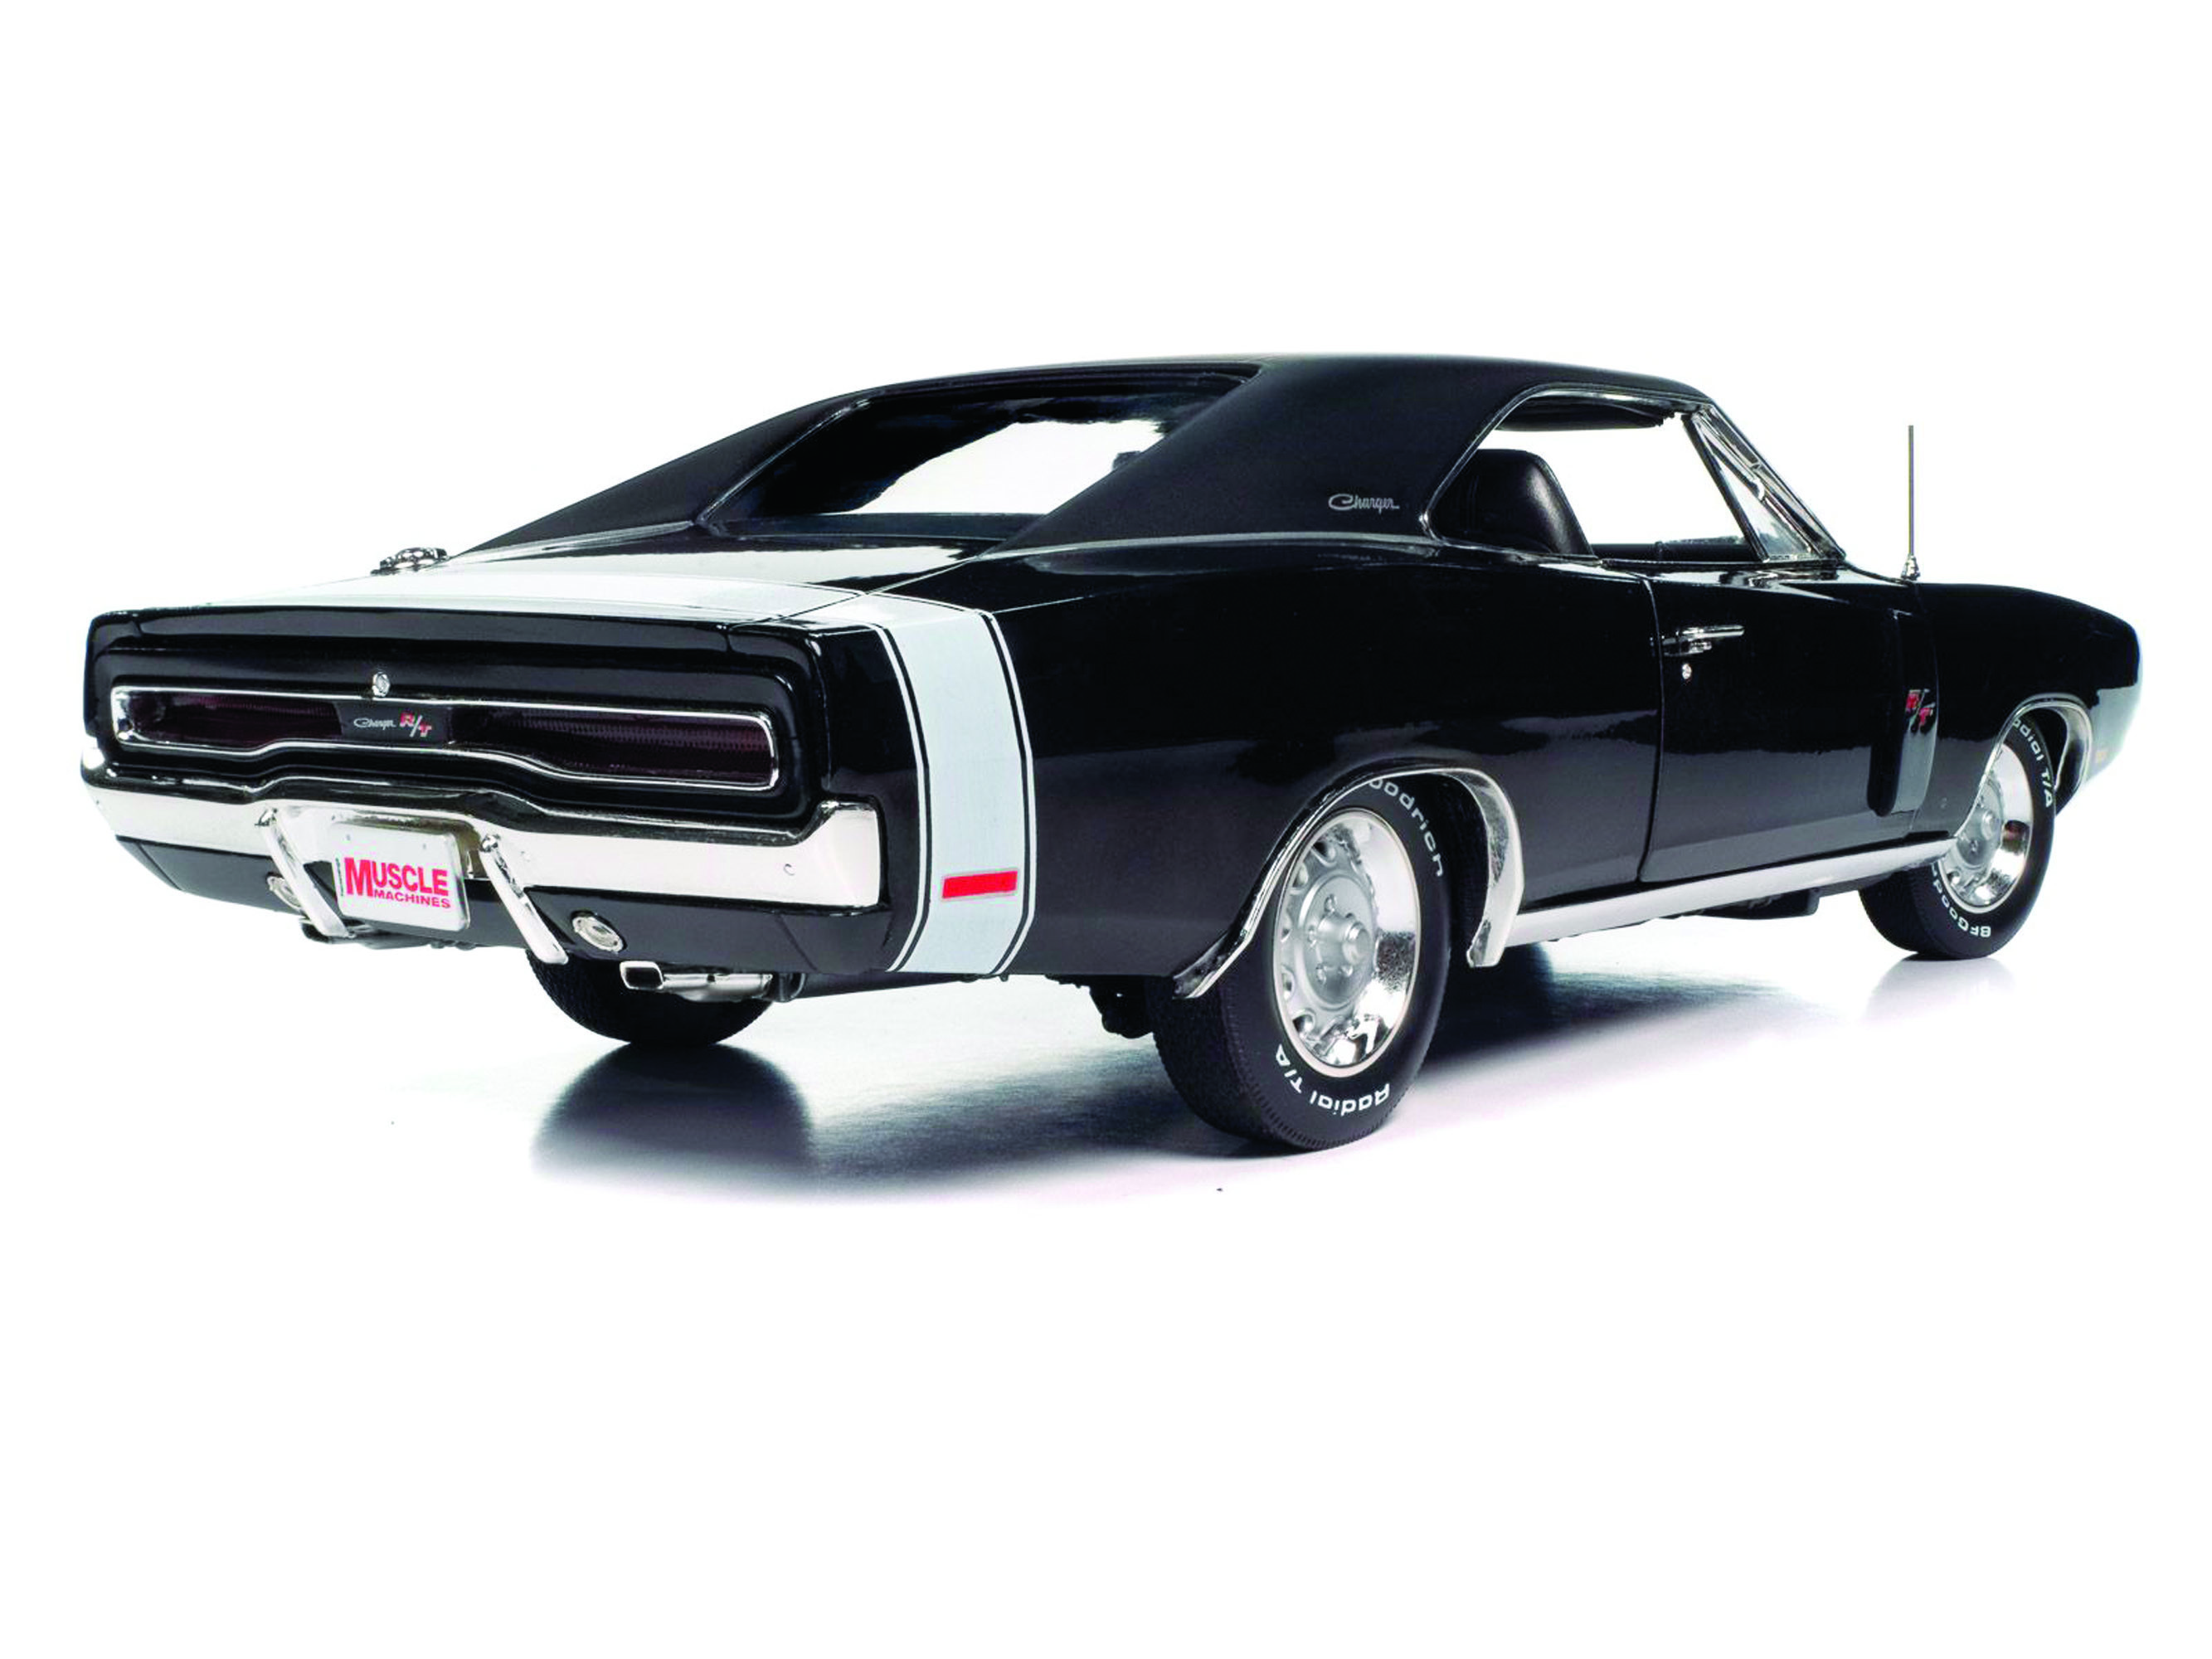 New Gear For Muscle Fans: Camaro Concept Cars, Scale 1970 Hemi Charger, And More